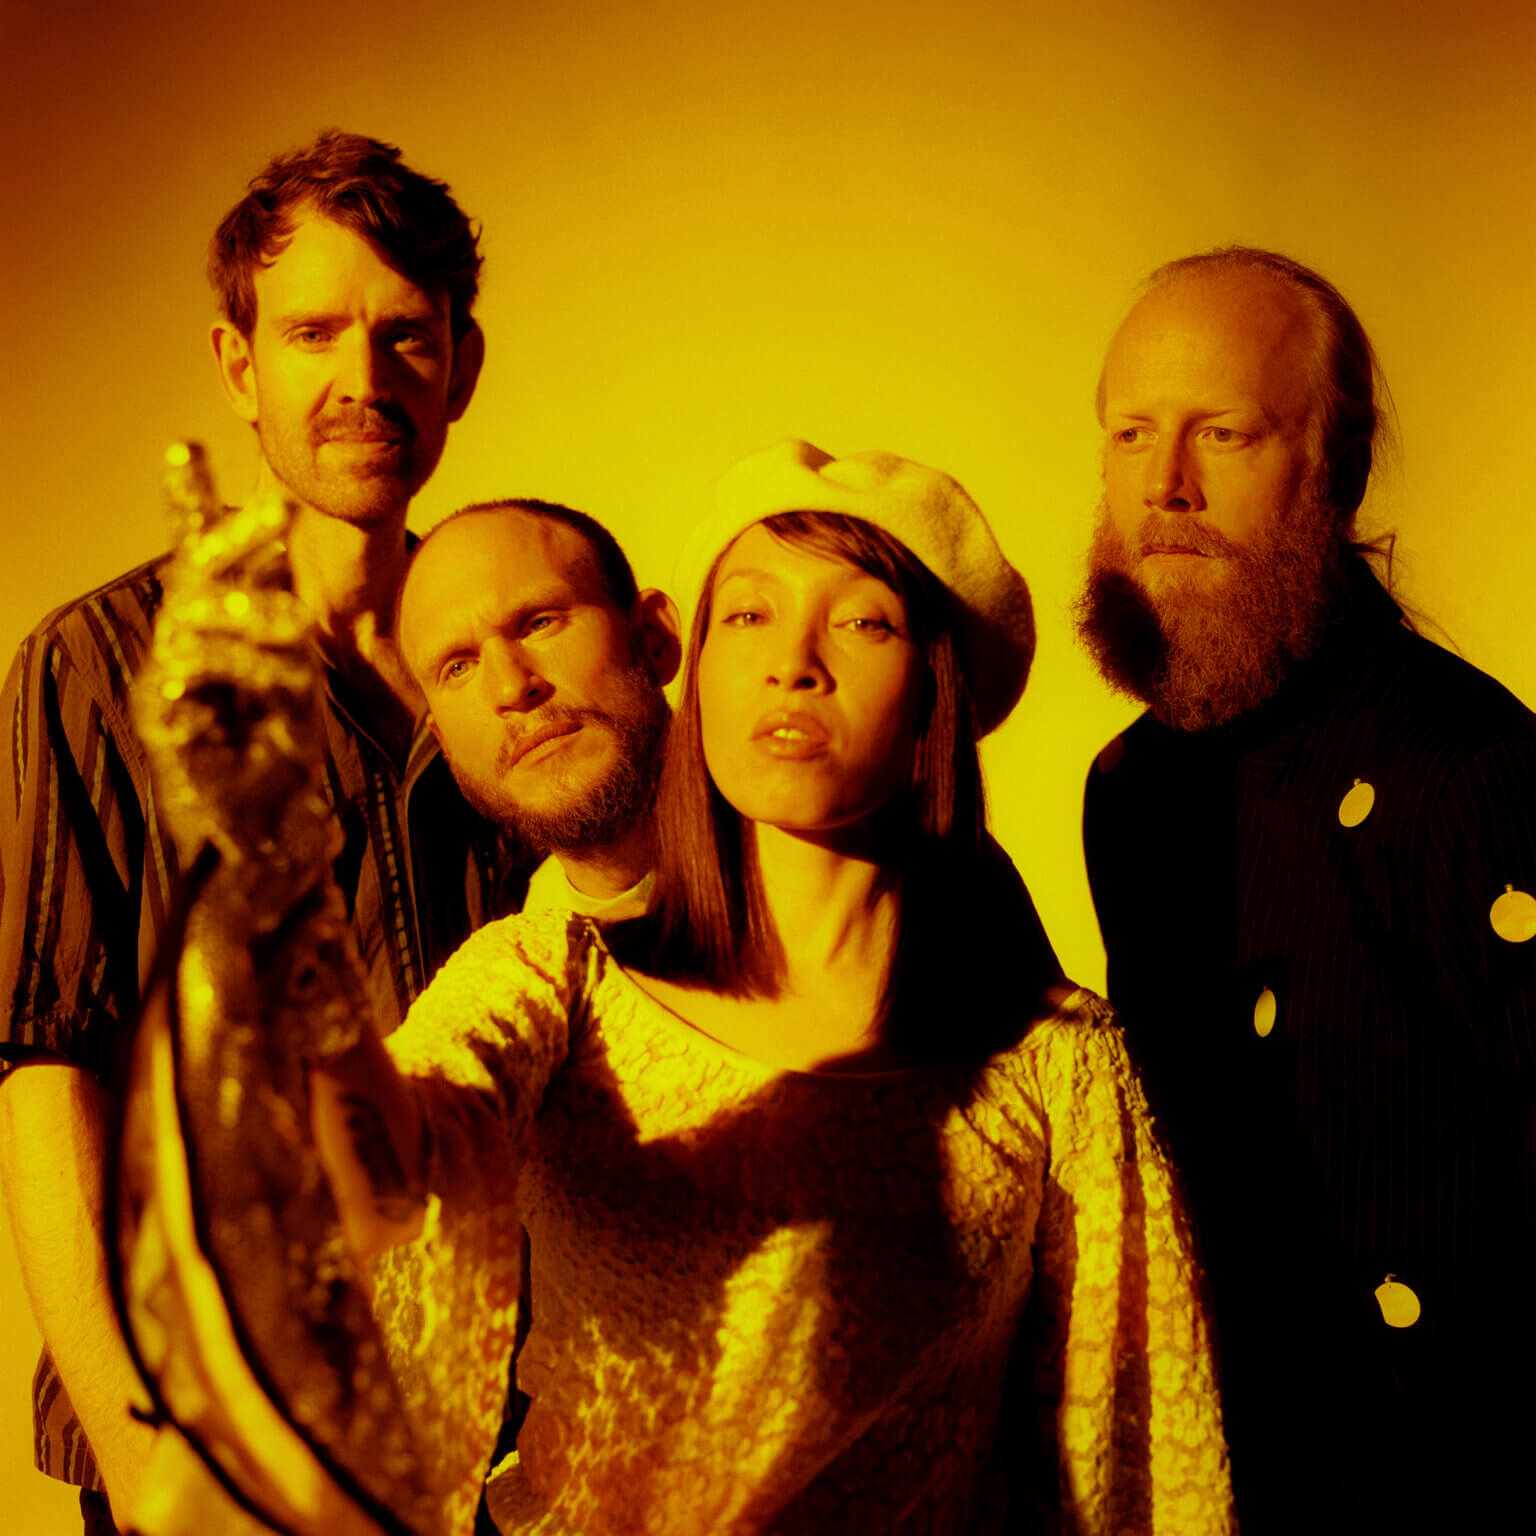 Little Dragon have announced their new EP Opening The Door, will drop on September 16th on Ninja Tune and streaming services